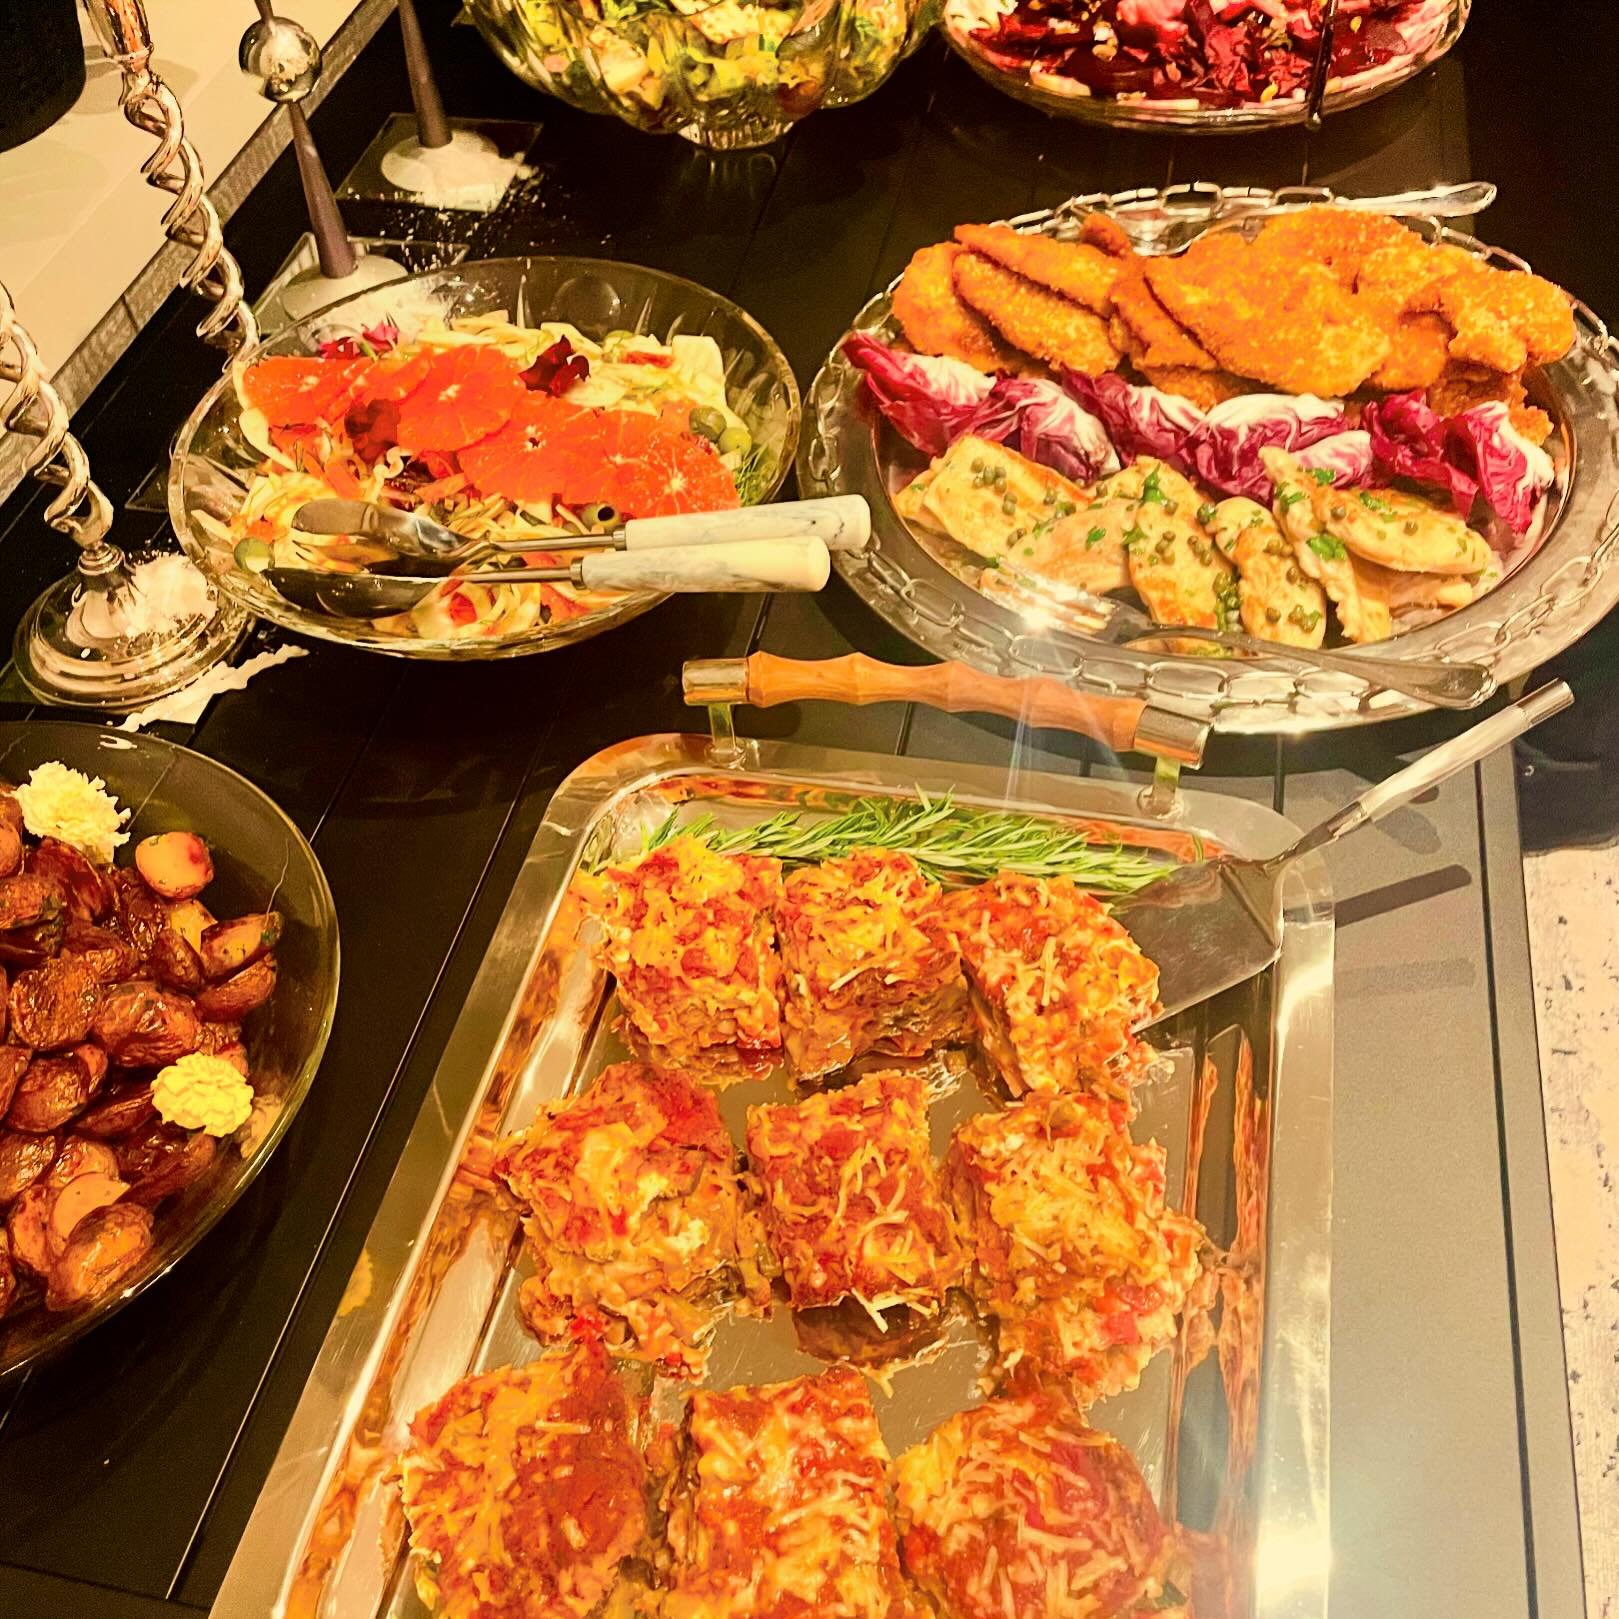 Passover buffet pt. 2 #bluaubergine #fabulousfood #privatechef #catering #nycprivatechef #kosherforpassover #pesach